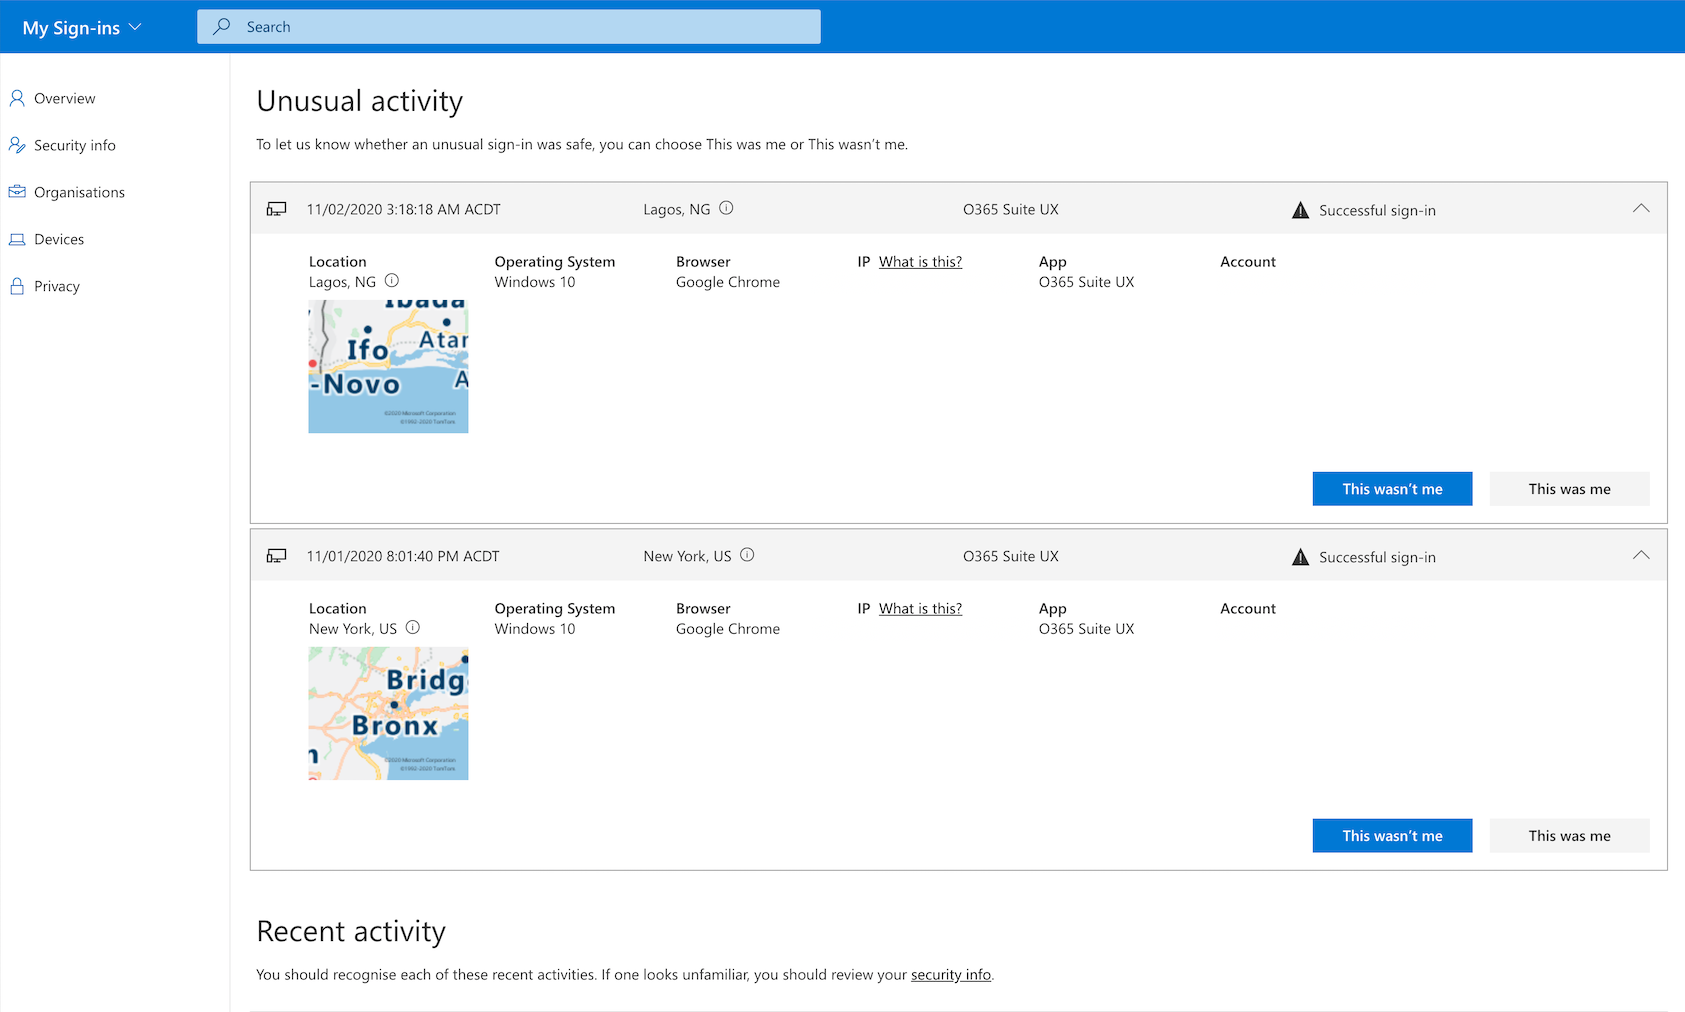 Screenshot of Office 365 account sign-ins showing Unusual Activity from New York on 01 Nov 2020 and Lagos on 02 Nov 2020.